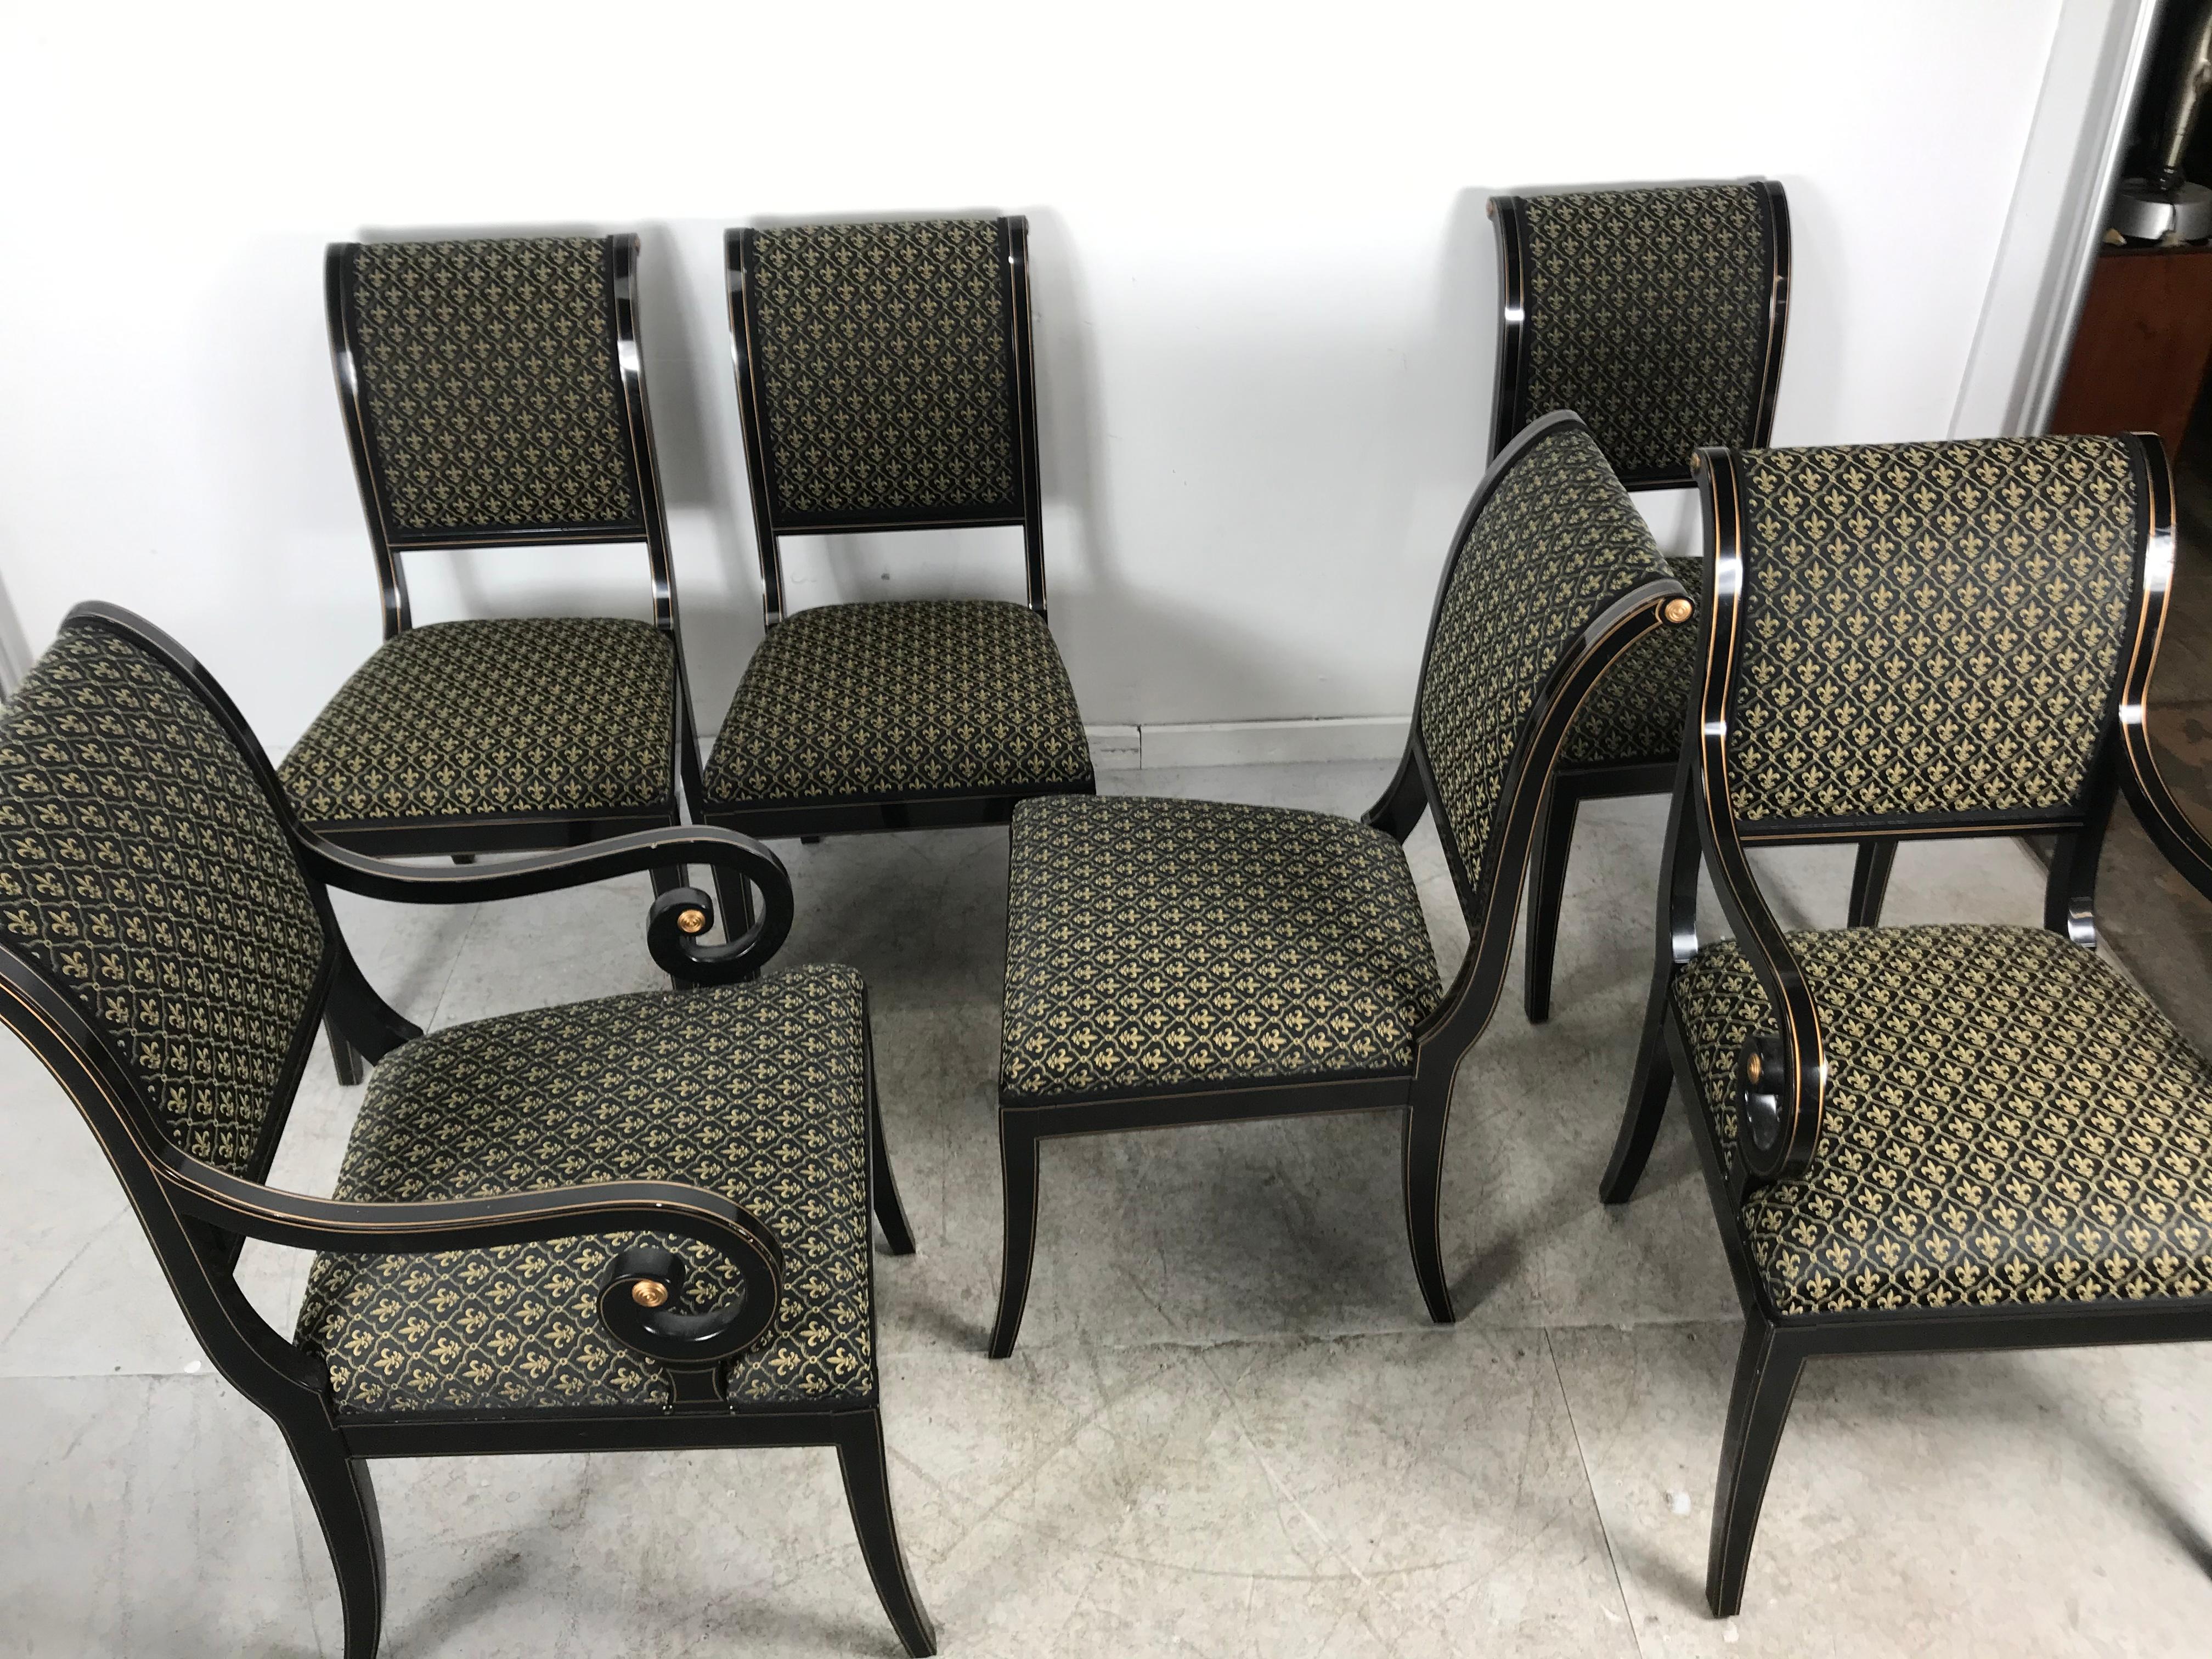 American Set 6 Black Lacquer and Gold Regency Modern Dining Chairs